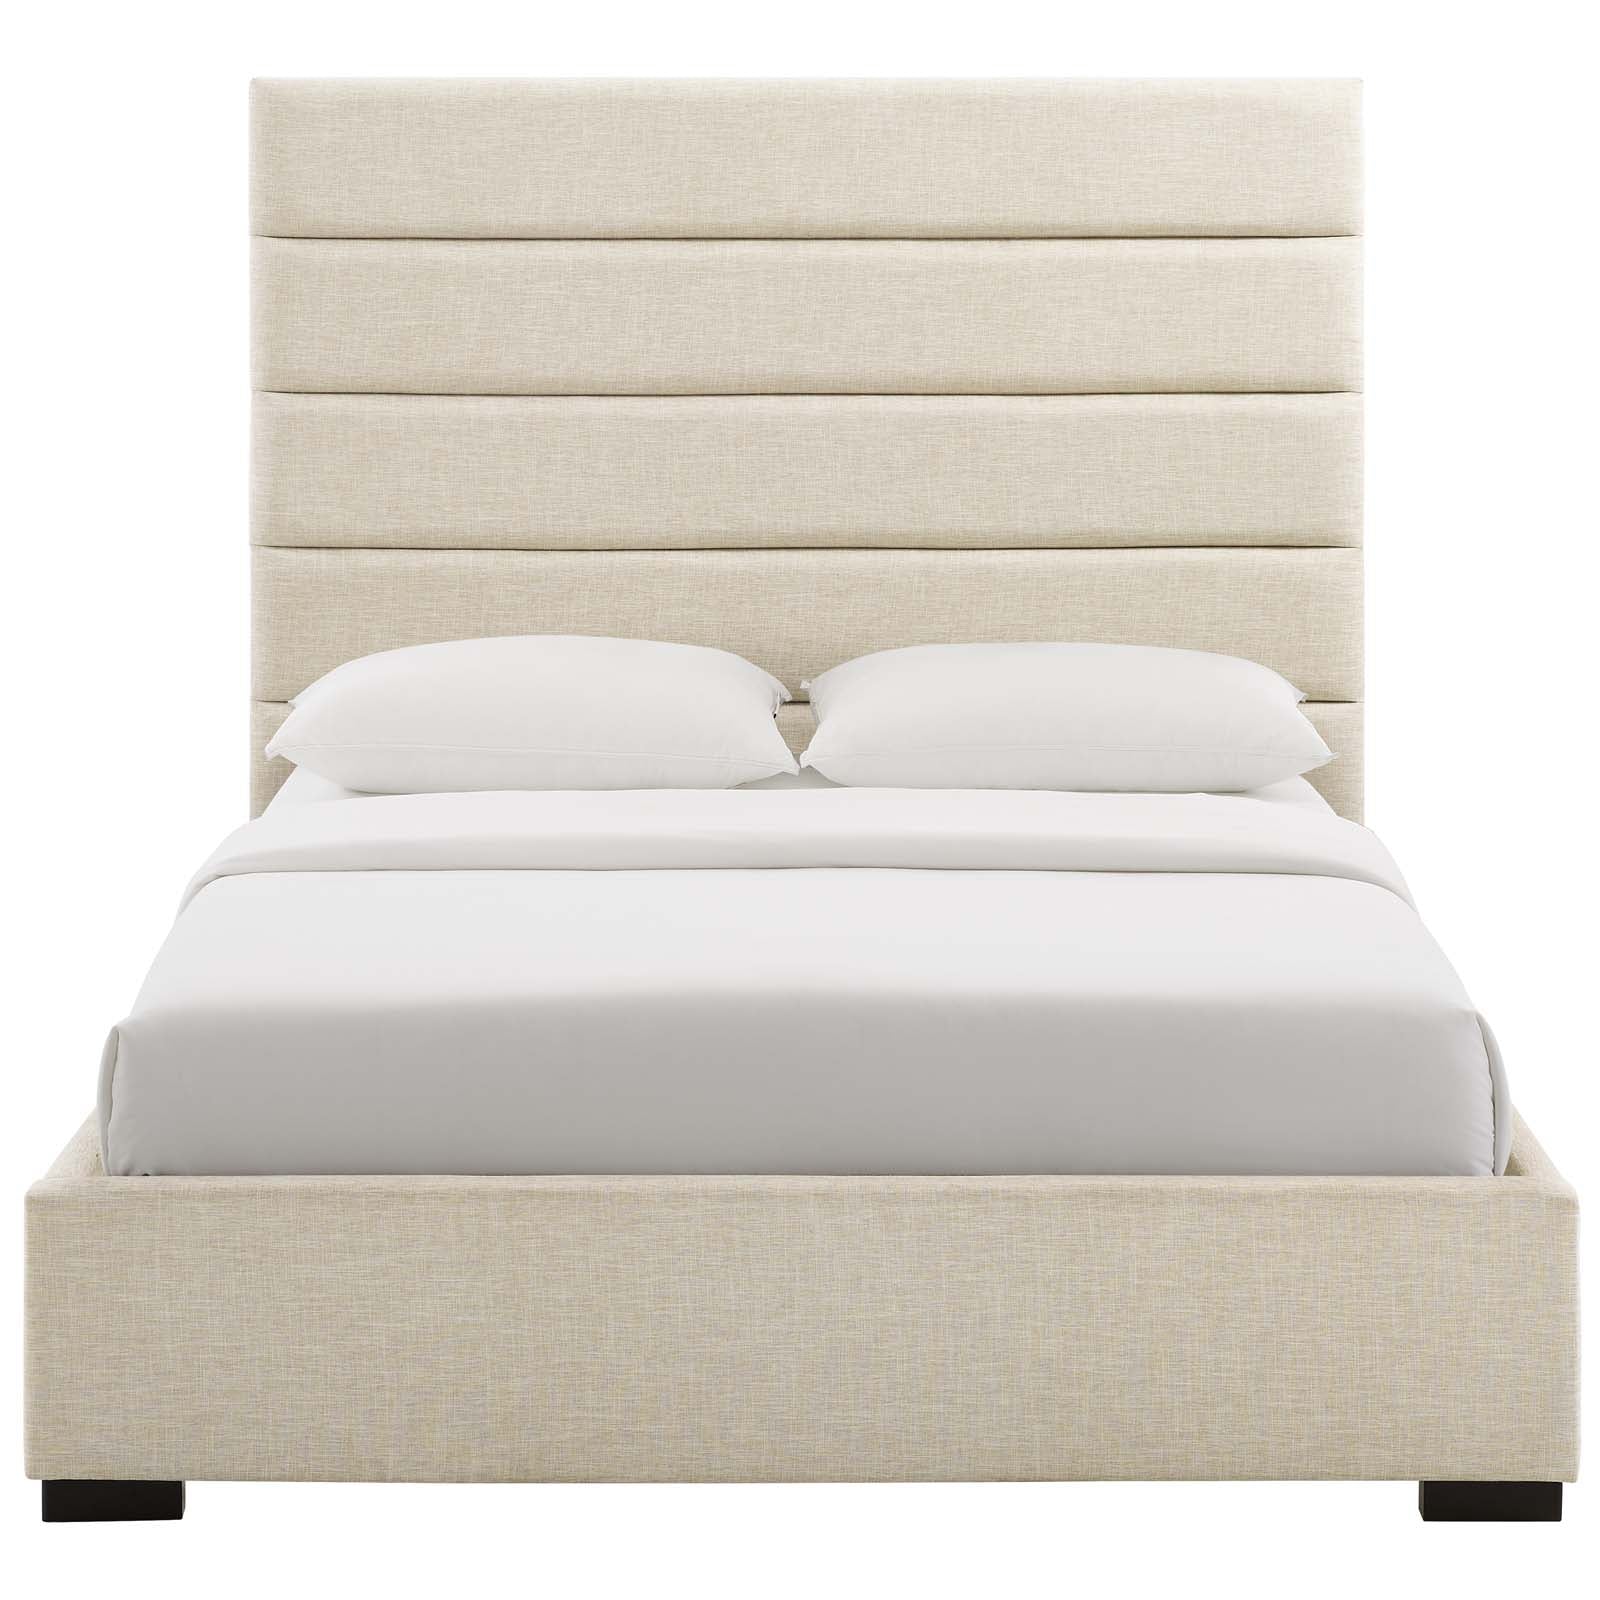 Genevieve Queen Upholstered Fabric Platform Bed - East Shore Modern Home Furnishings